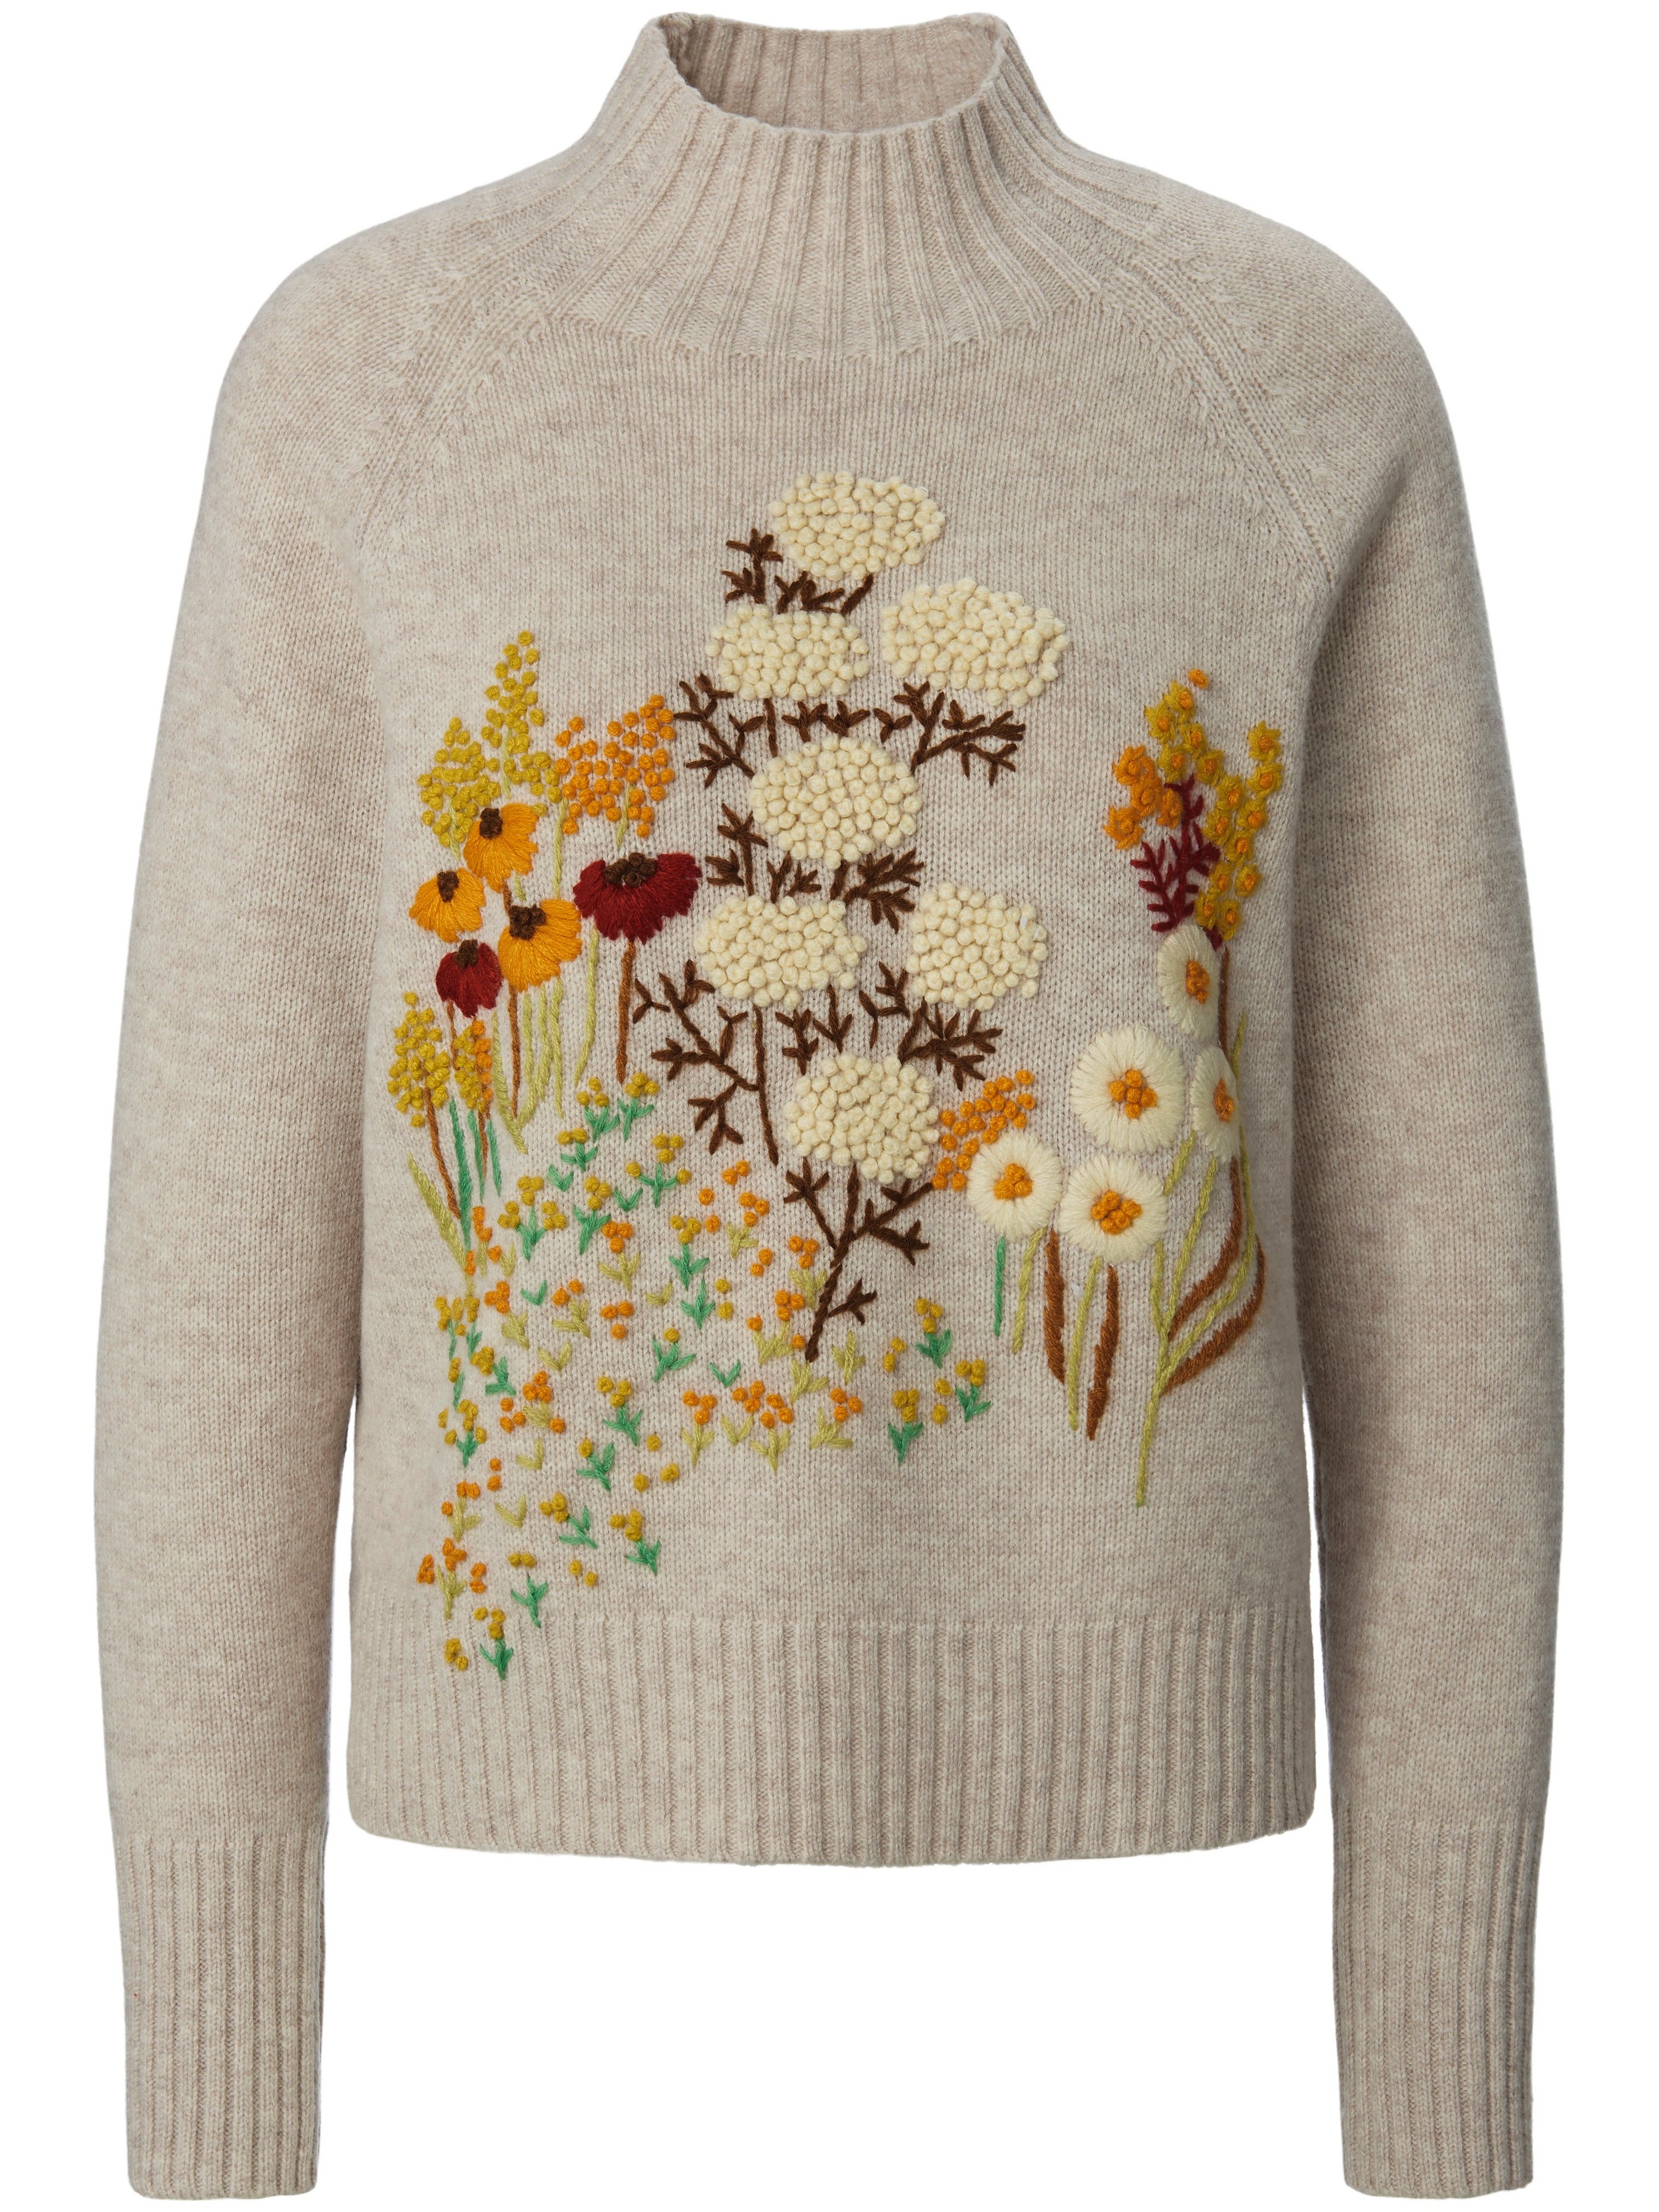 Le pull Toni manches longues raglan  Candygarden beige